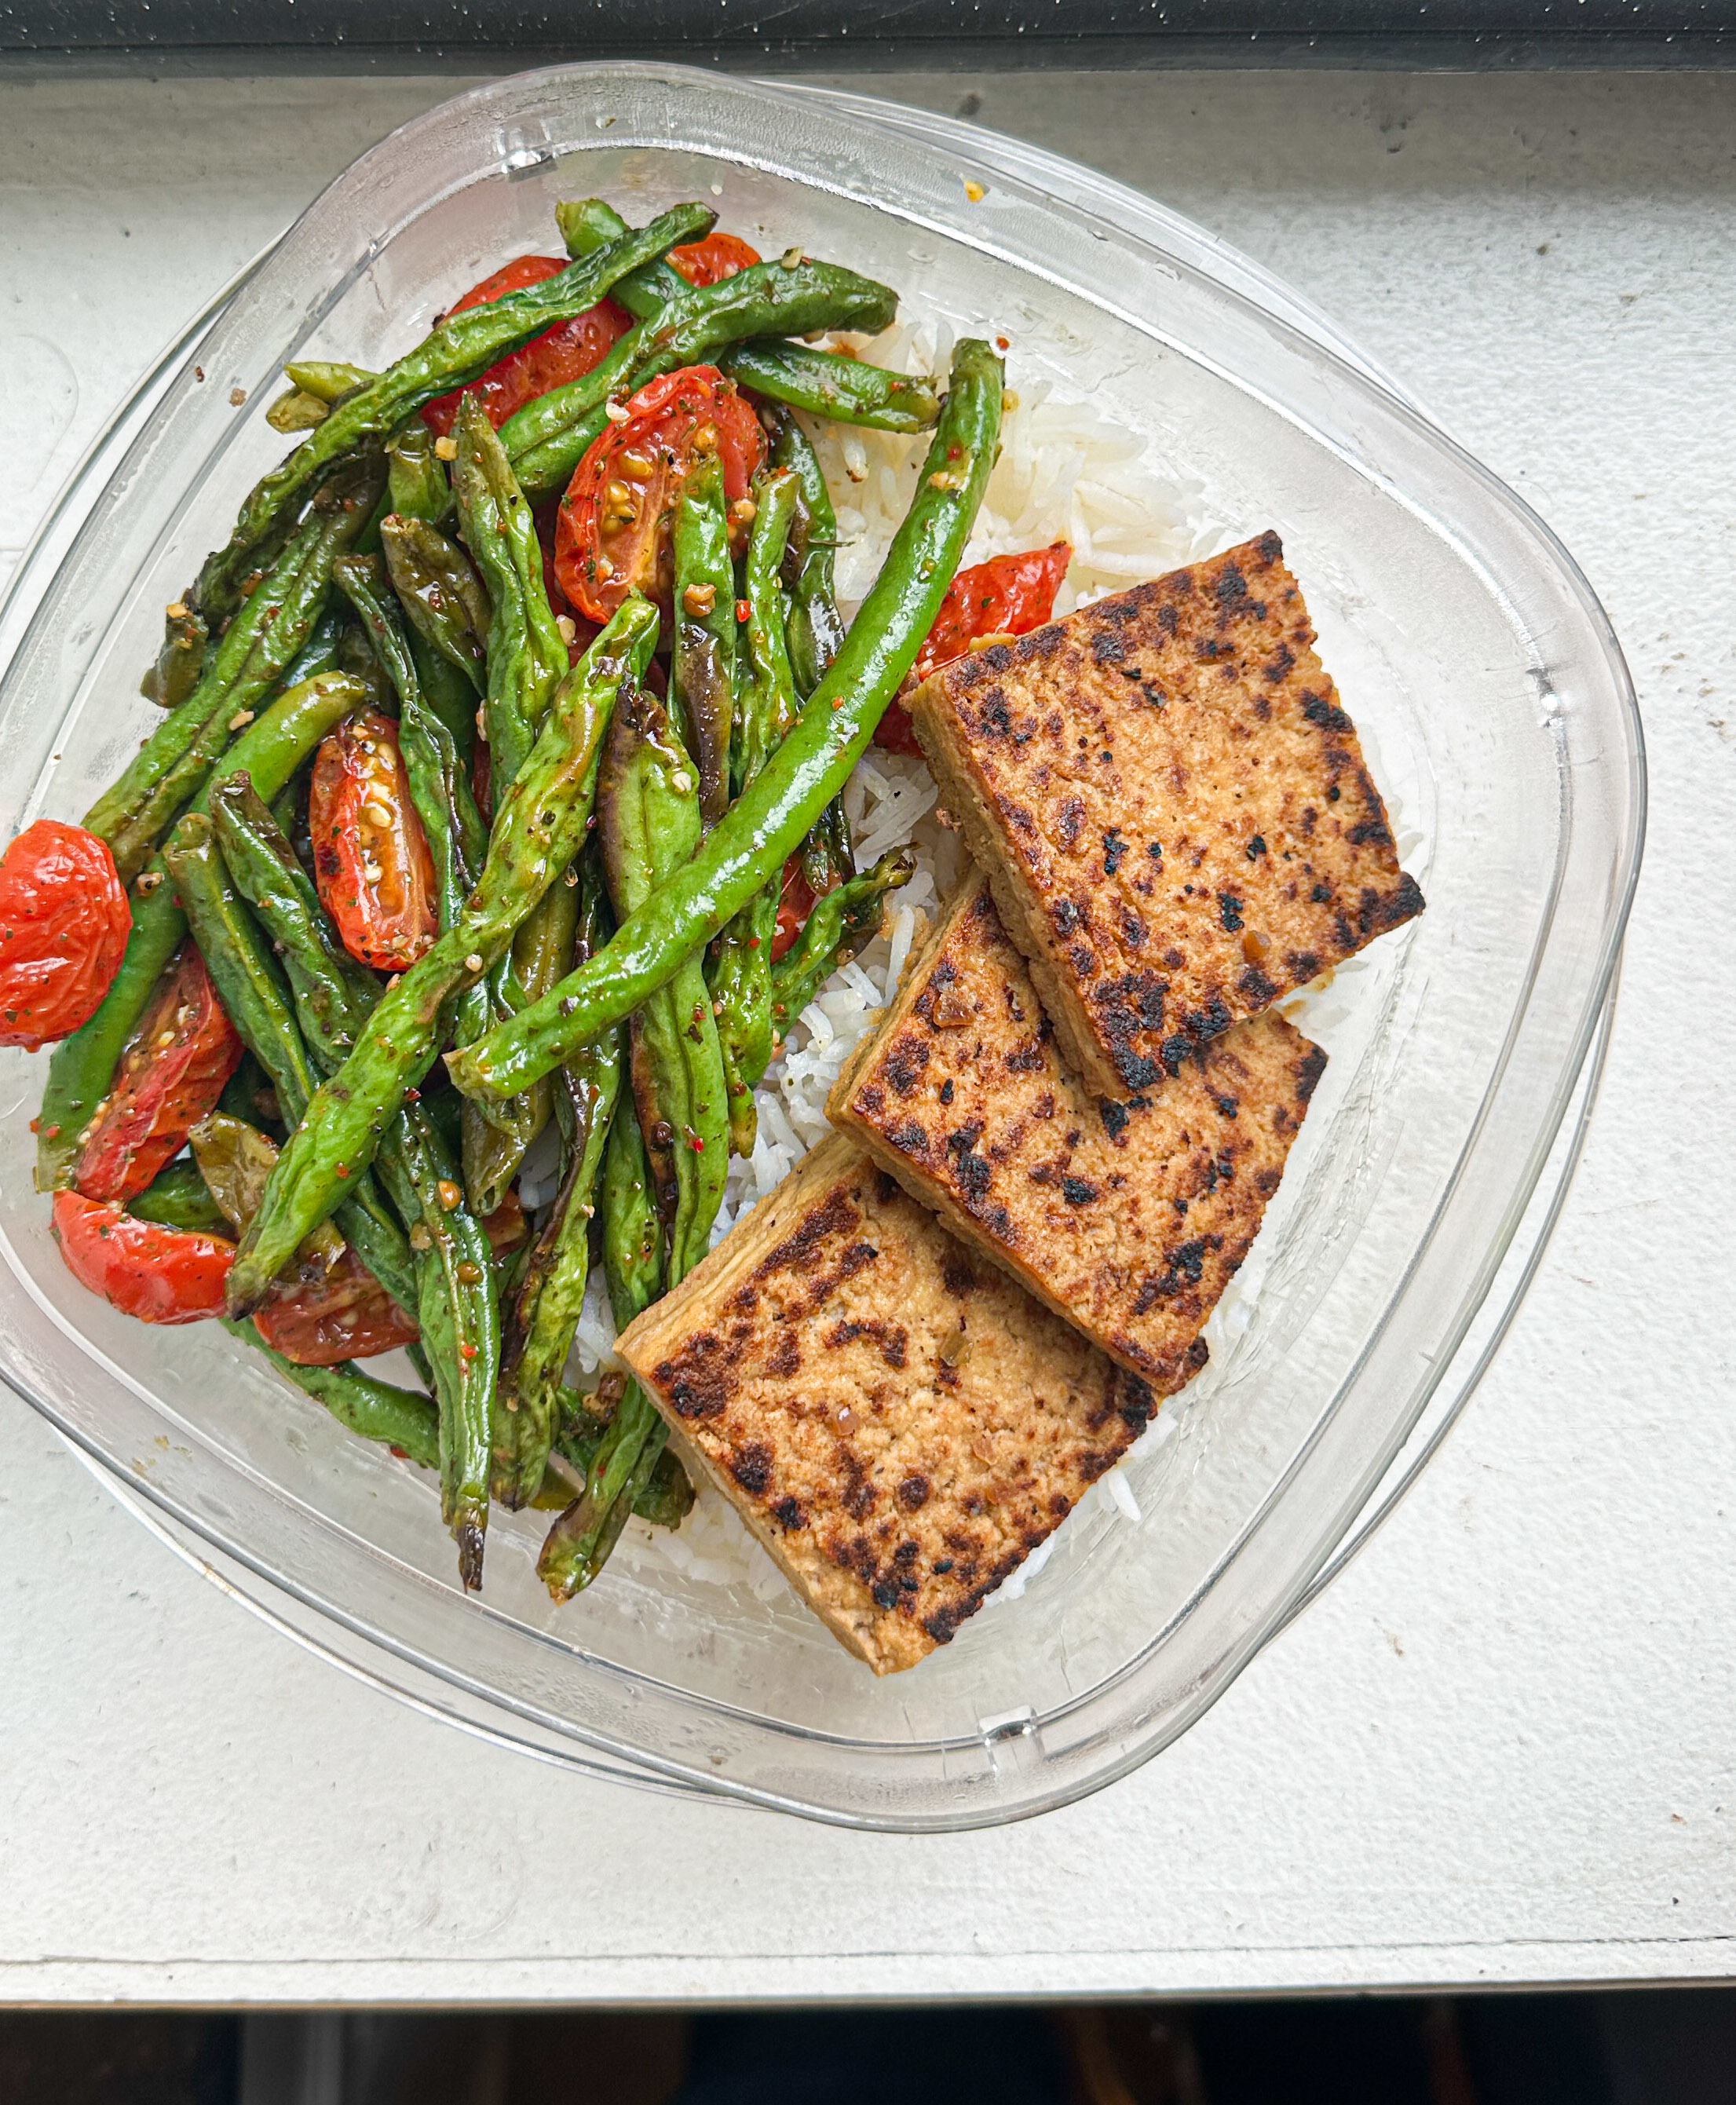 A meal in a clear container with grilled asparagus, cherry tomatoes, and two slices of tofu